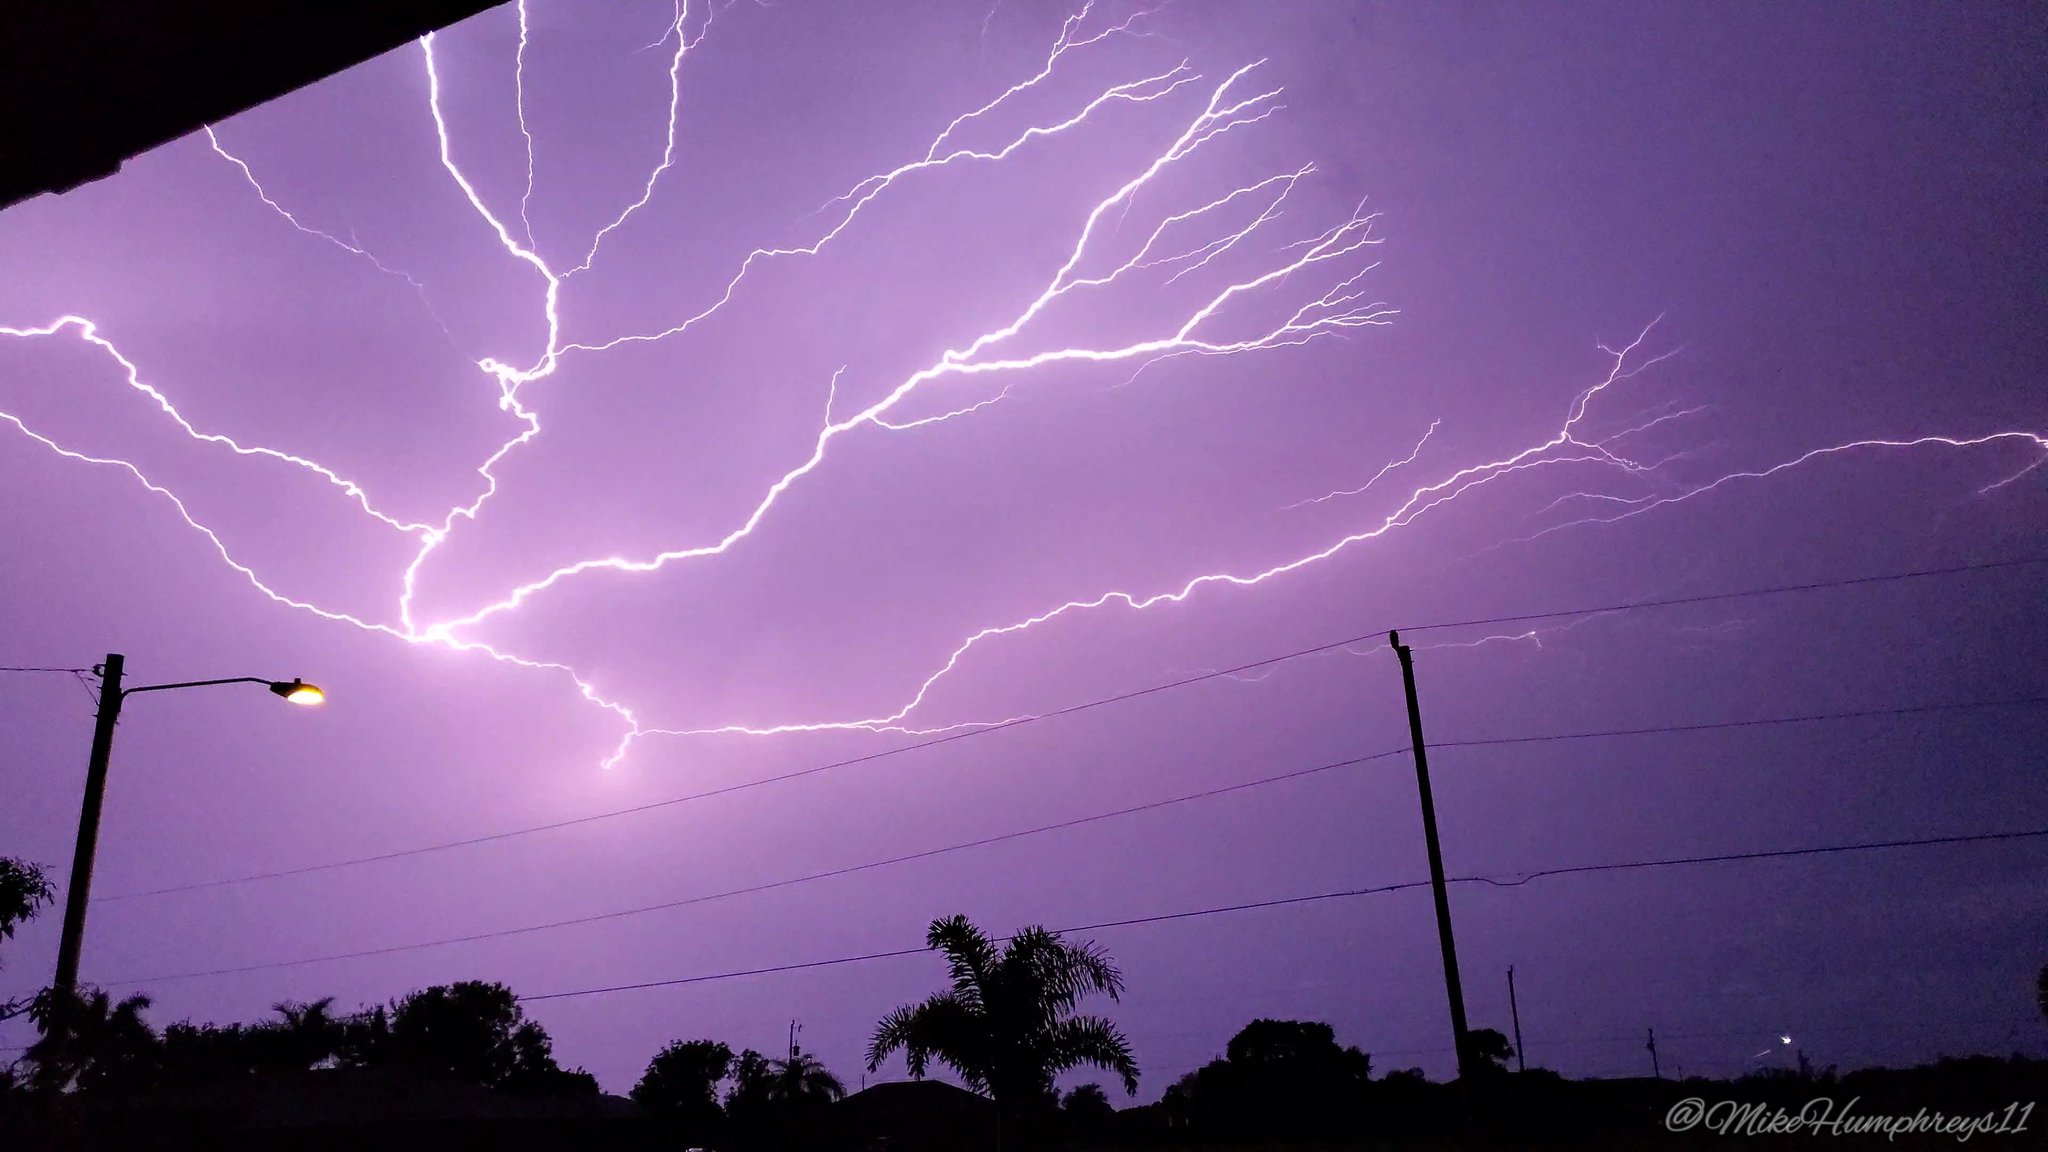 Lightning just before sunrise in Cape Coral, FL by Mike Humphreys @MikeHumphreys11